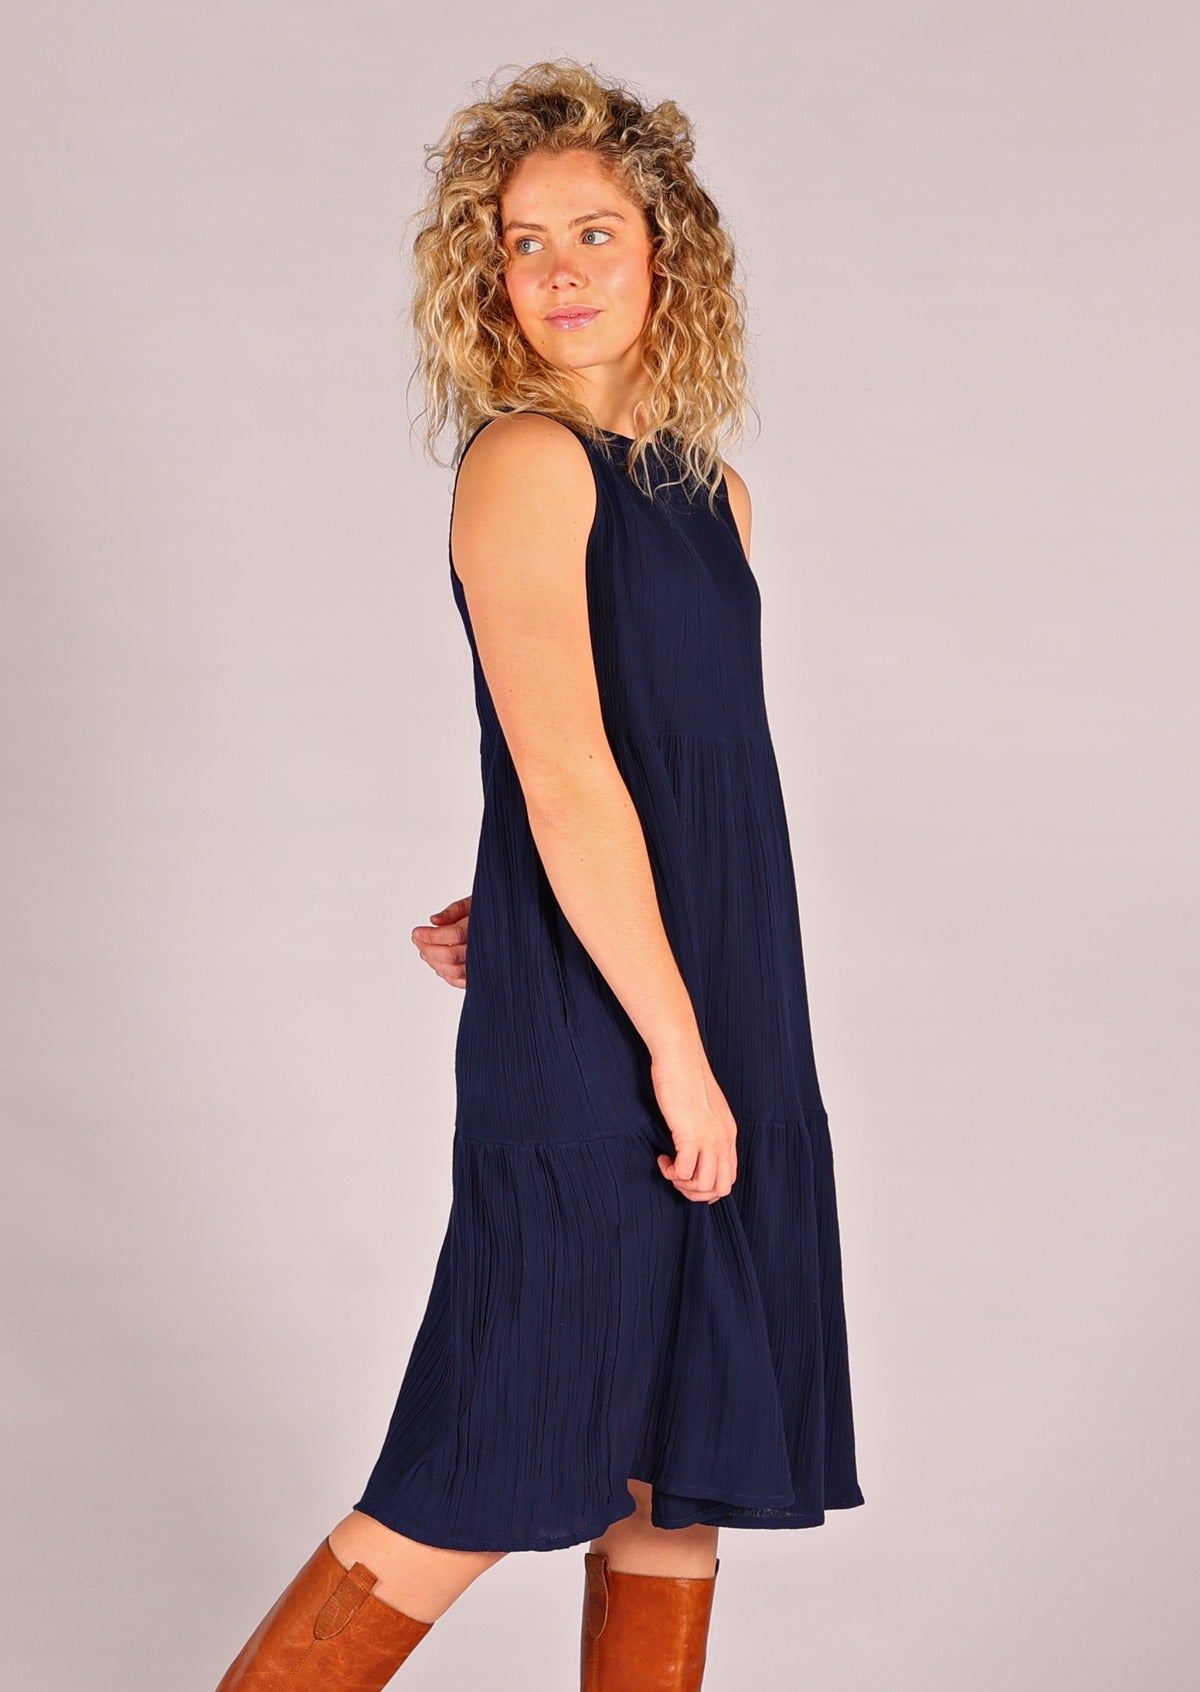 Sleeveless double cotton dress is perfect for warm days, or can be layered in the cool